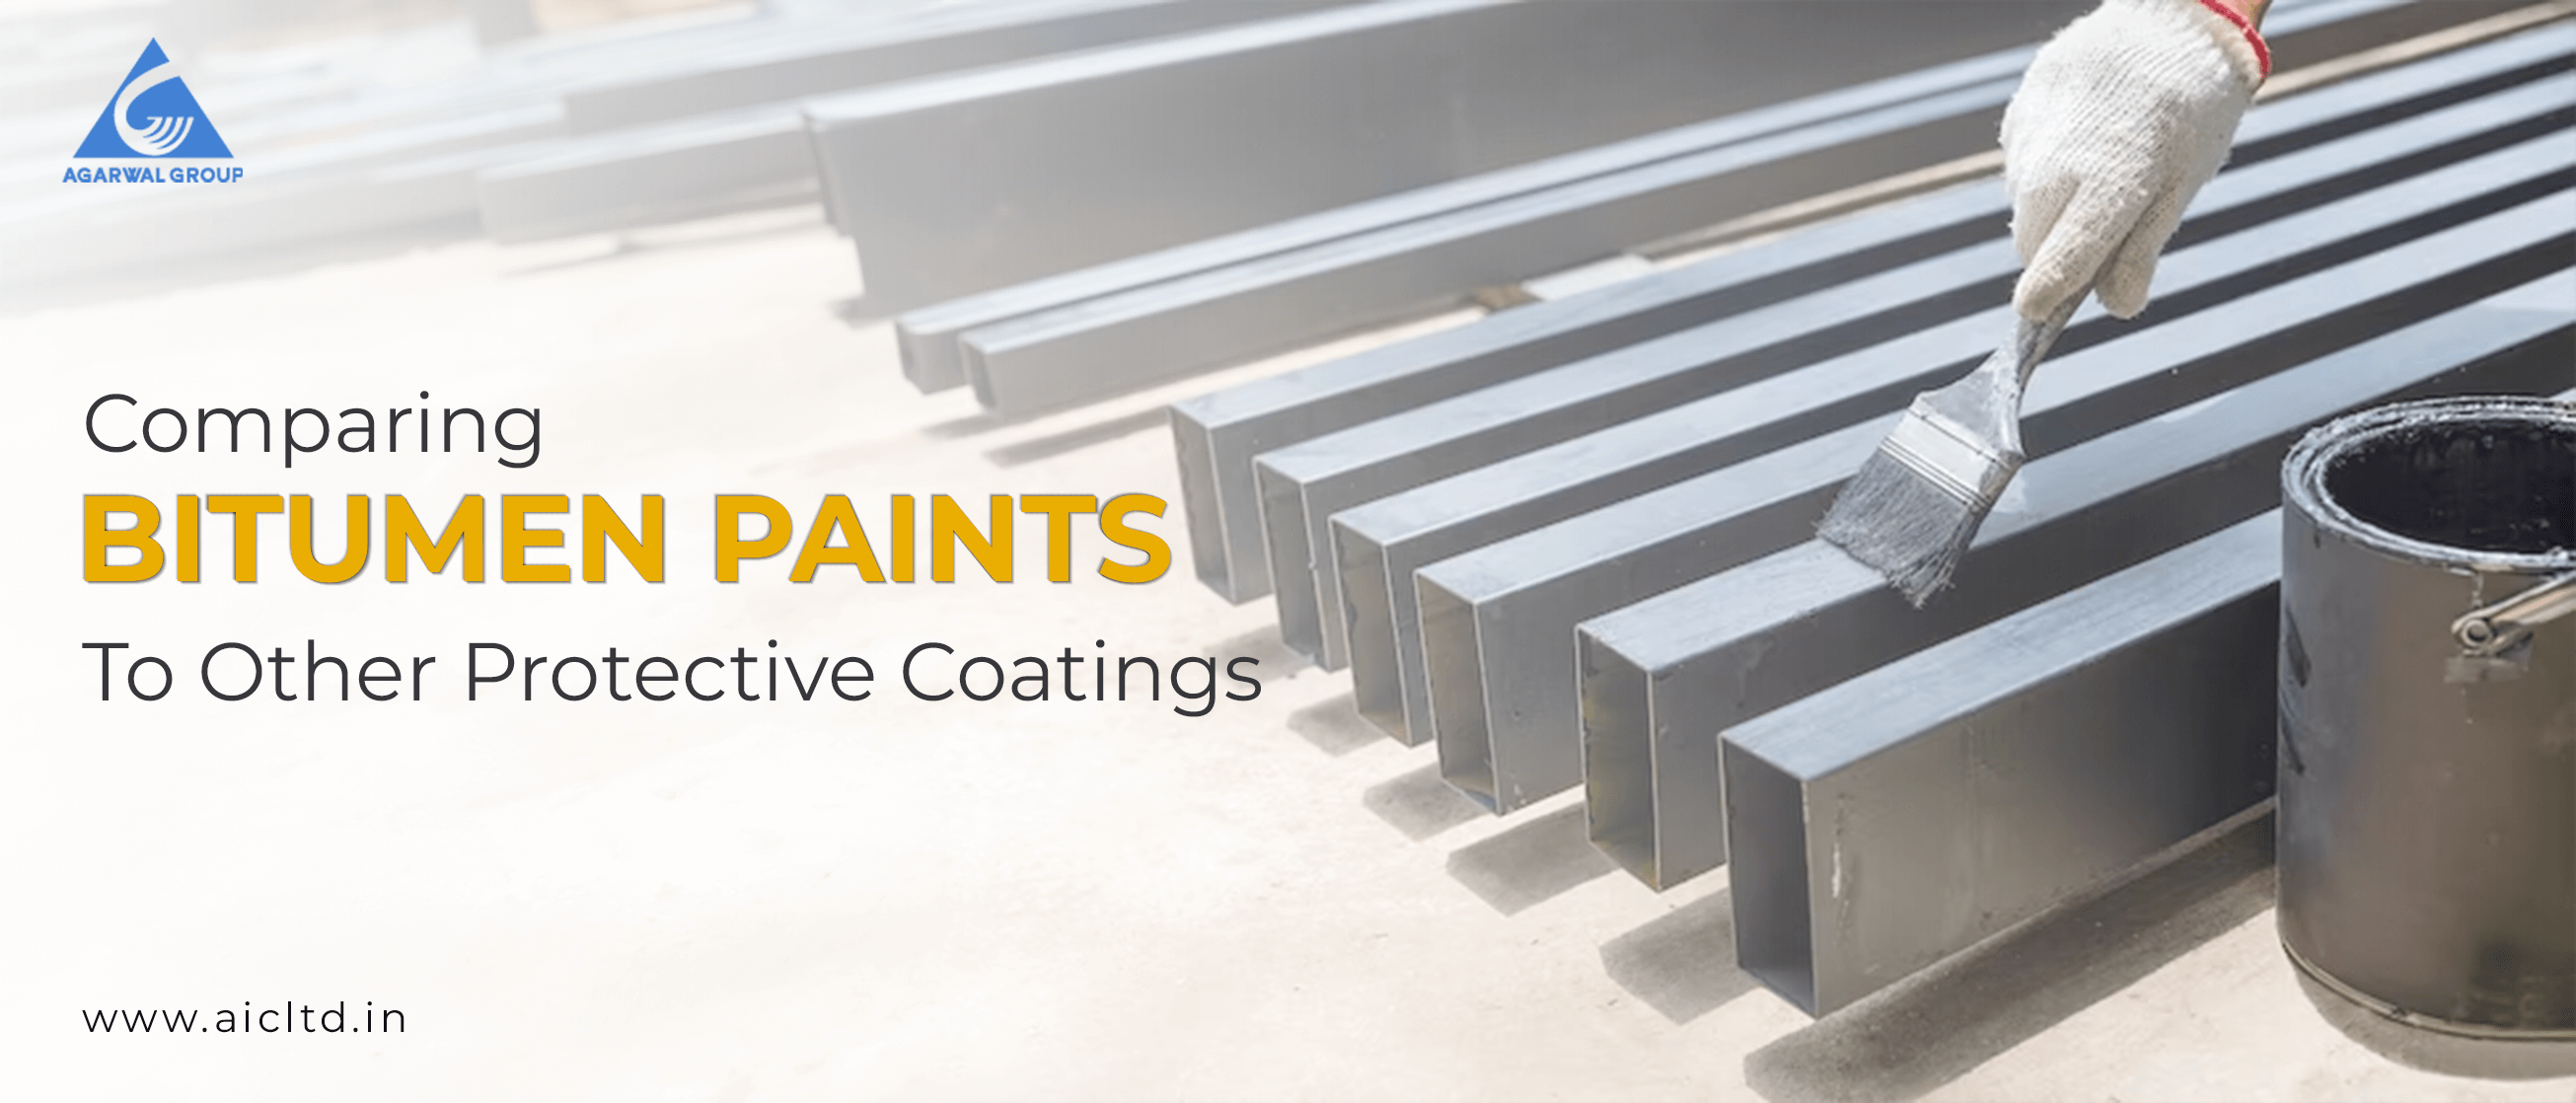 Comparing Bitumen Paints to Other Protective Coatings